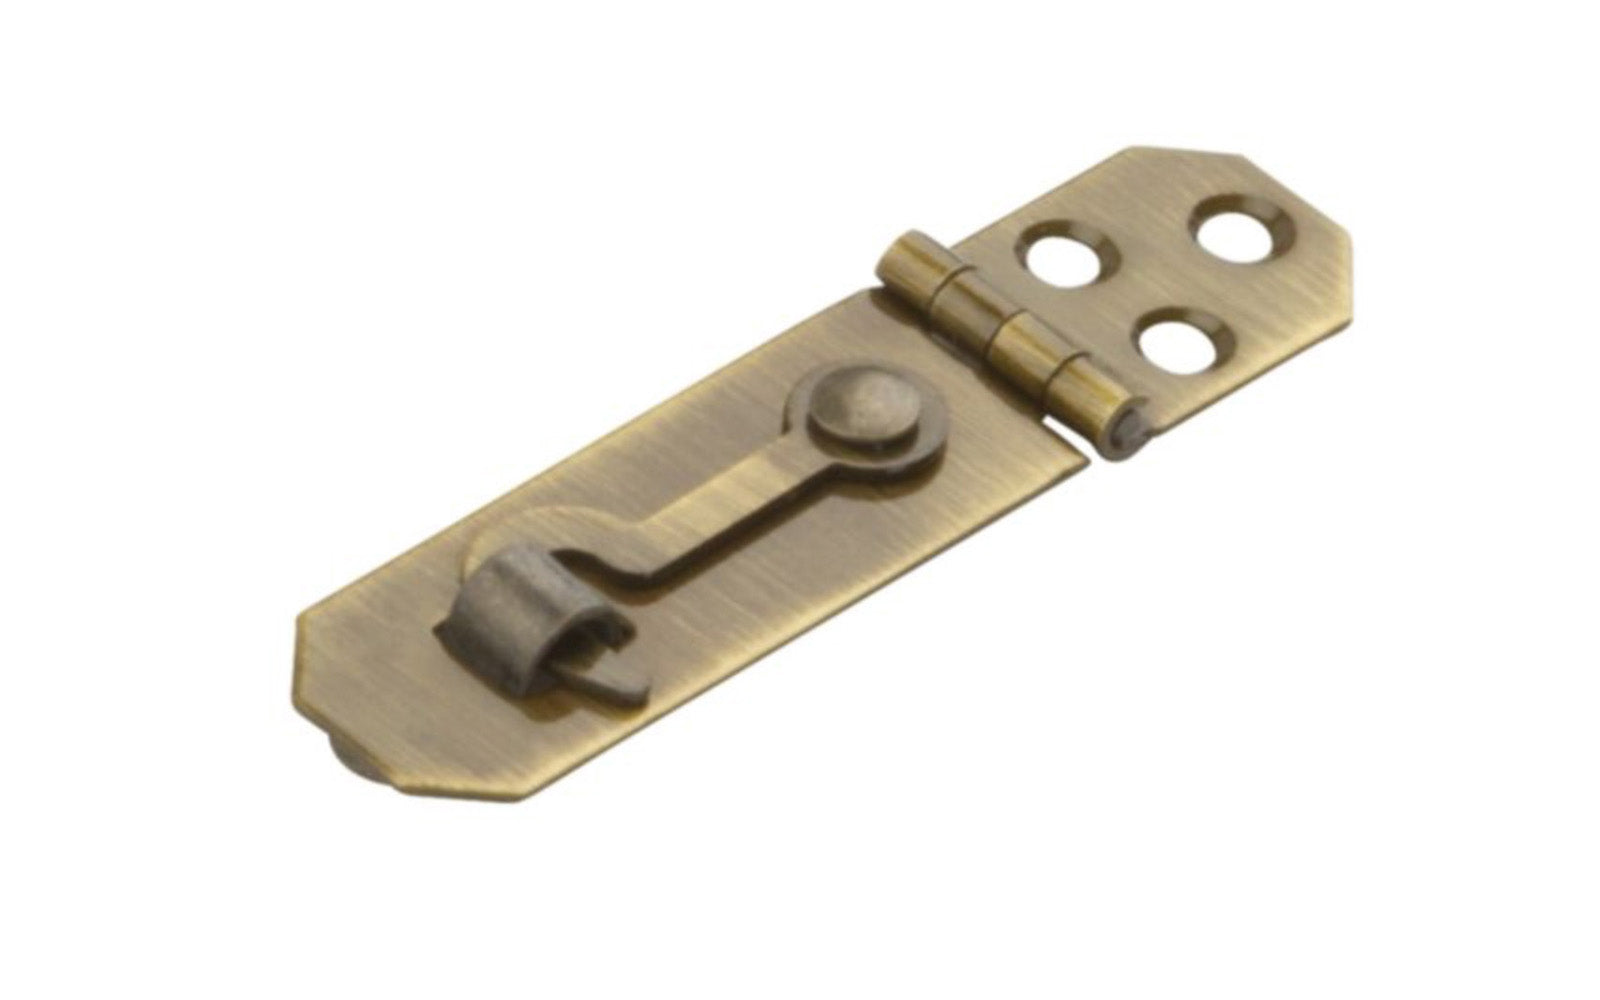 This mini hasp with hook is designed for small chests, jewelry boxes, craft projects, etc. Surface mount. Sold as one hasp in pack. Includes screws. Antique Brass Finish. 038613211926